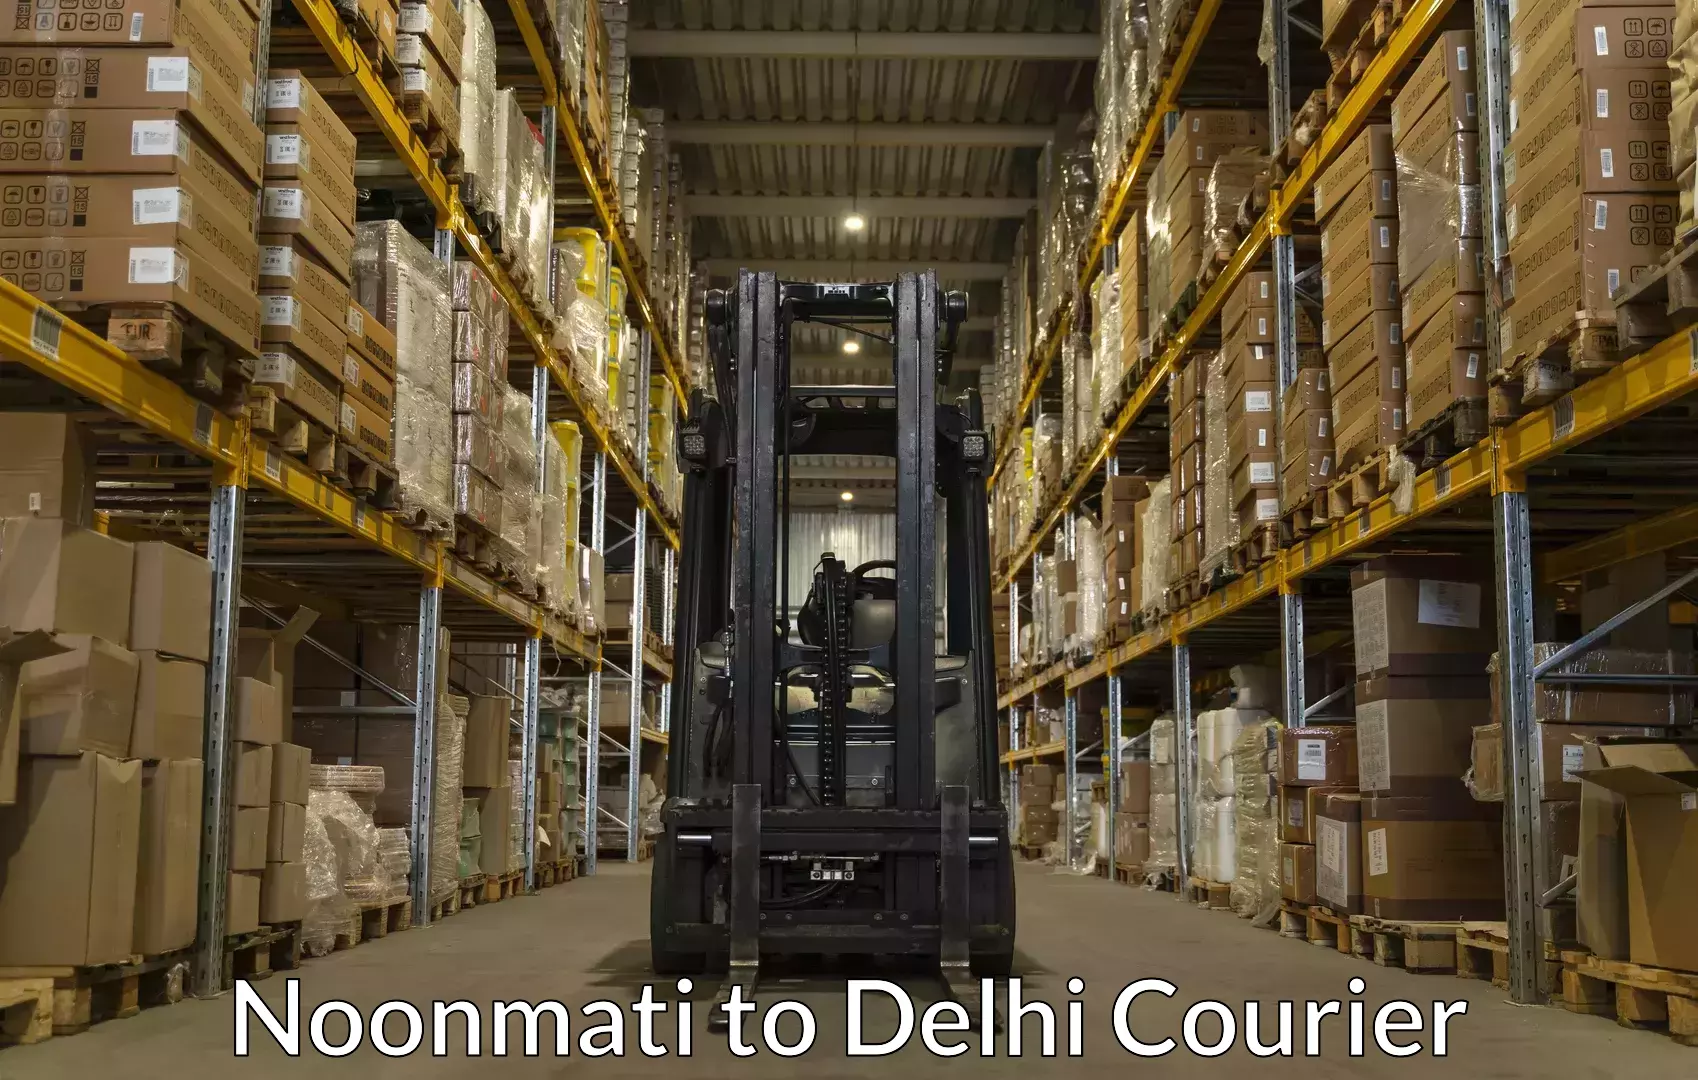 Luggage transport consulting Noonmati to Delhi